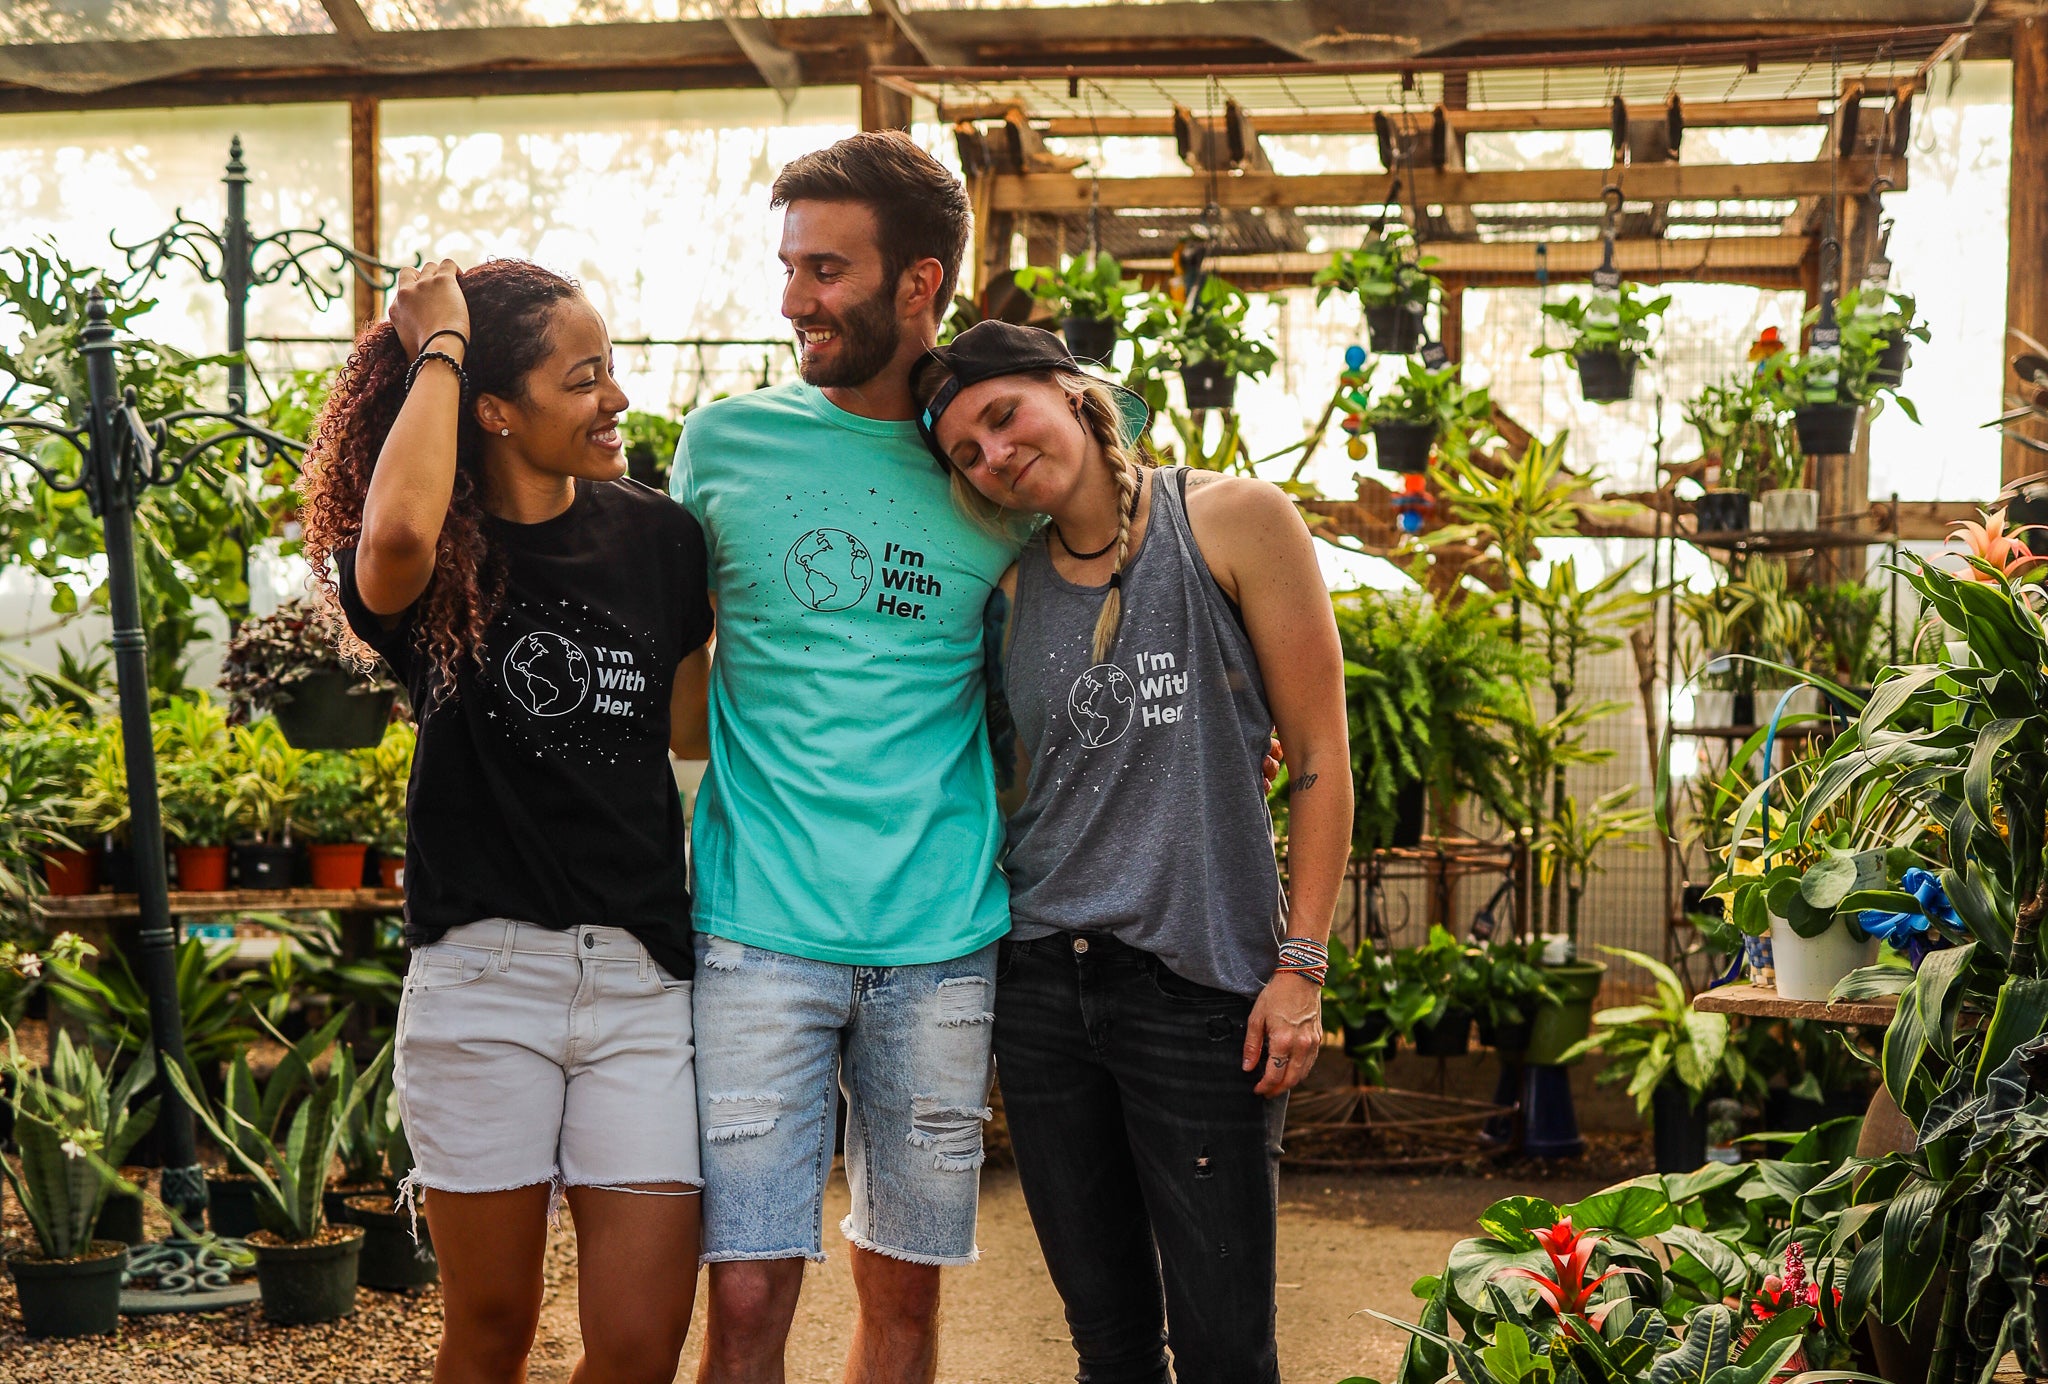 photo of 3 humans wearing only human shirts that read "I'm with her" while in a greenhouse